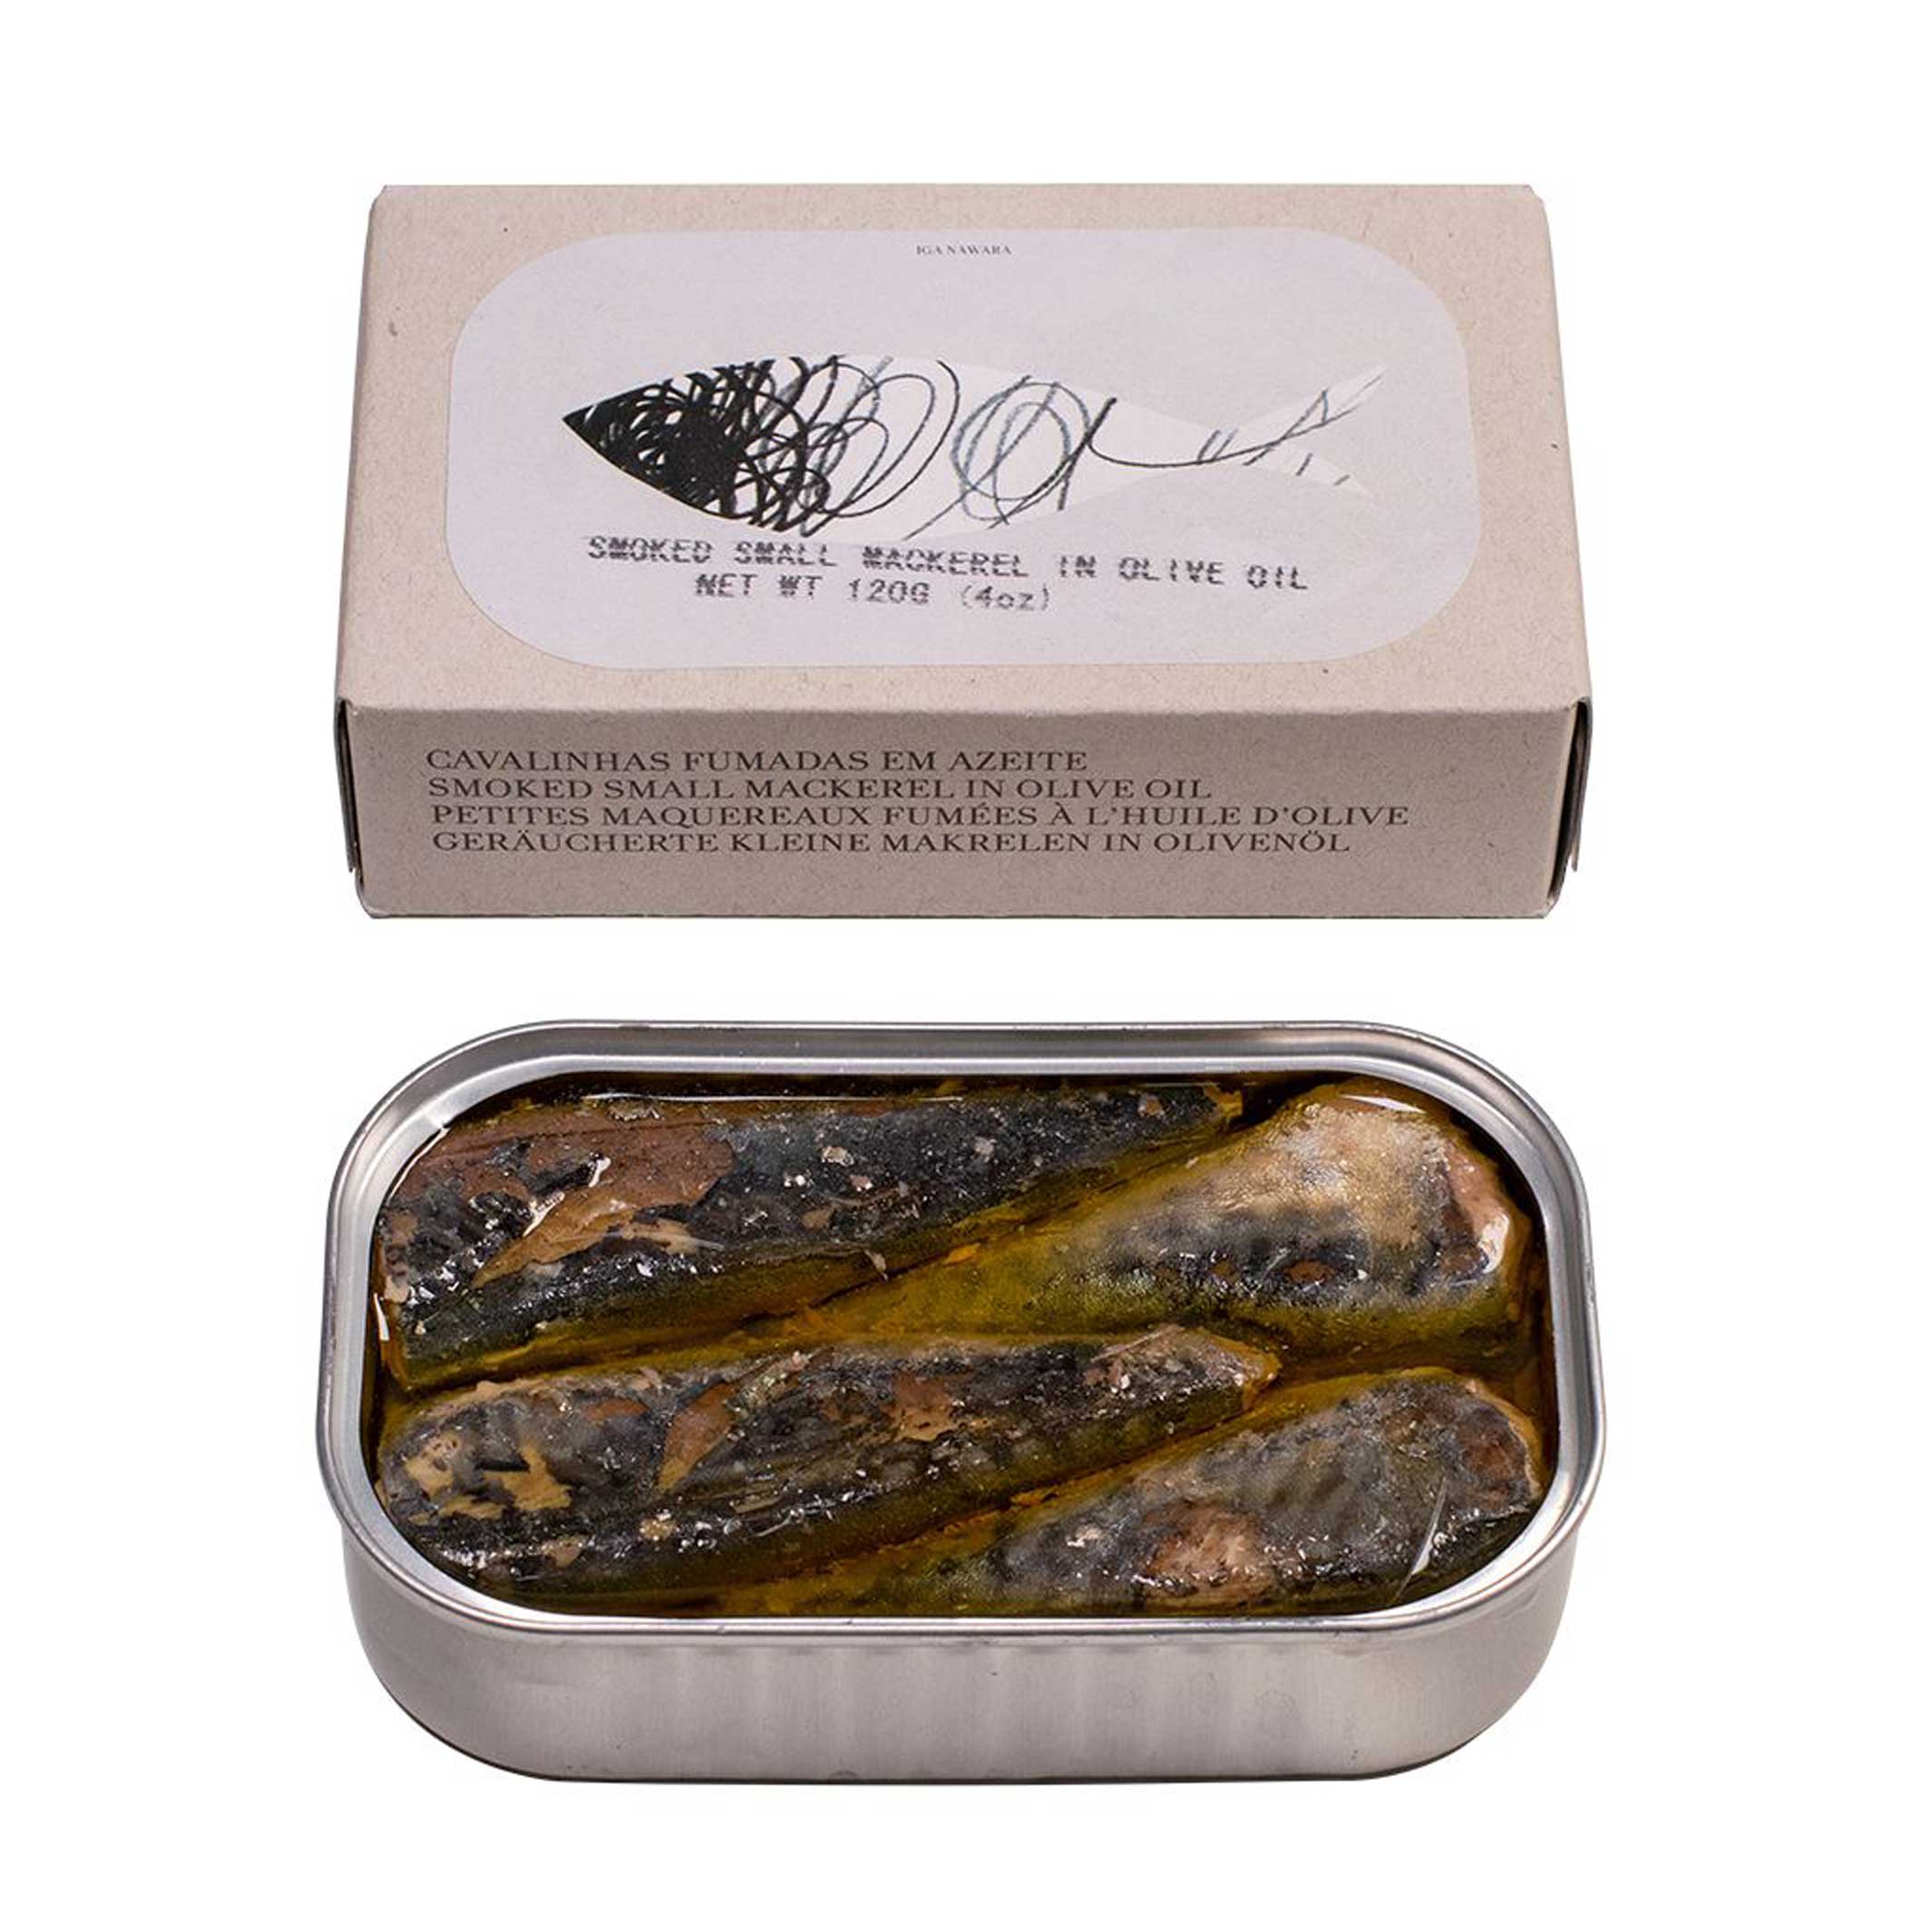 Smoked small MACKEREL in Extra Virgin Olive Oil | CANNED GOURMET FISH | 120 g | José Gourmet